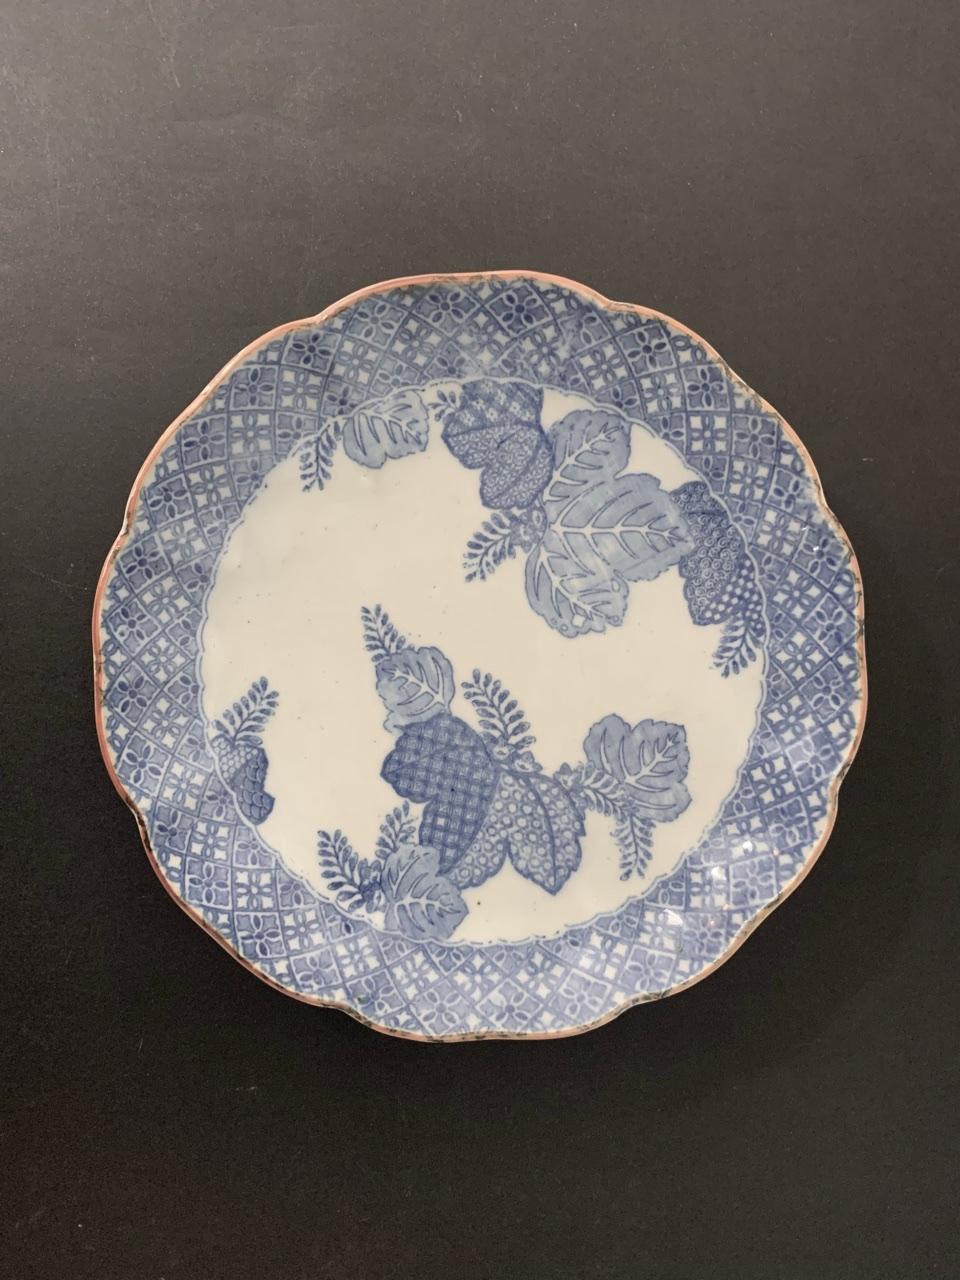 Nice « Blanc Bleu » porcelain plate inspired the Compagnie des Indes from XIXth century. This porcelain soup plate represents exotic plant elements. Ornaments are visible on the sides of the plate. 

The arrival of porcelain in Europe was linked